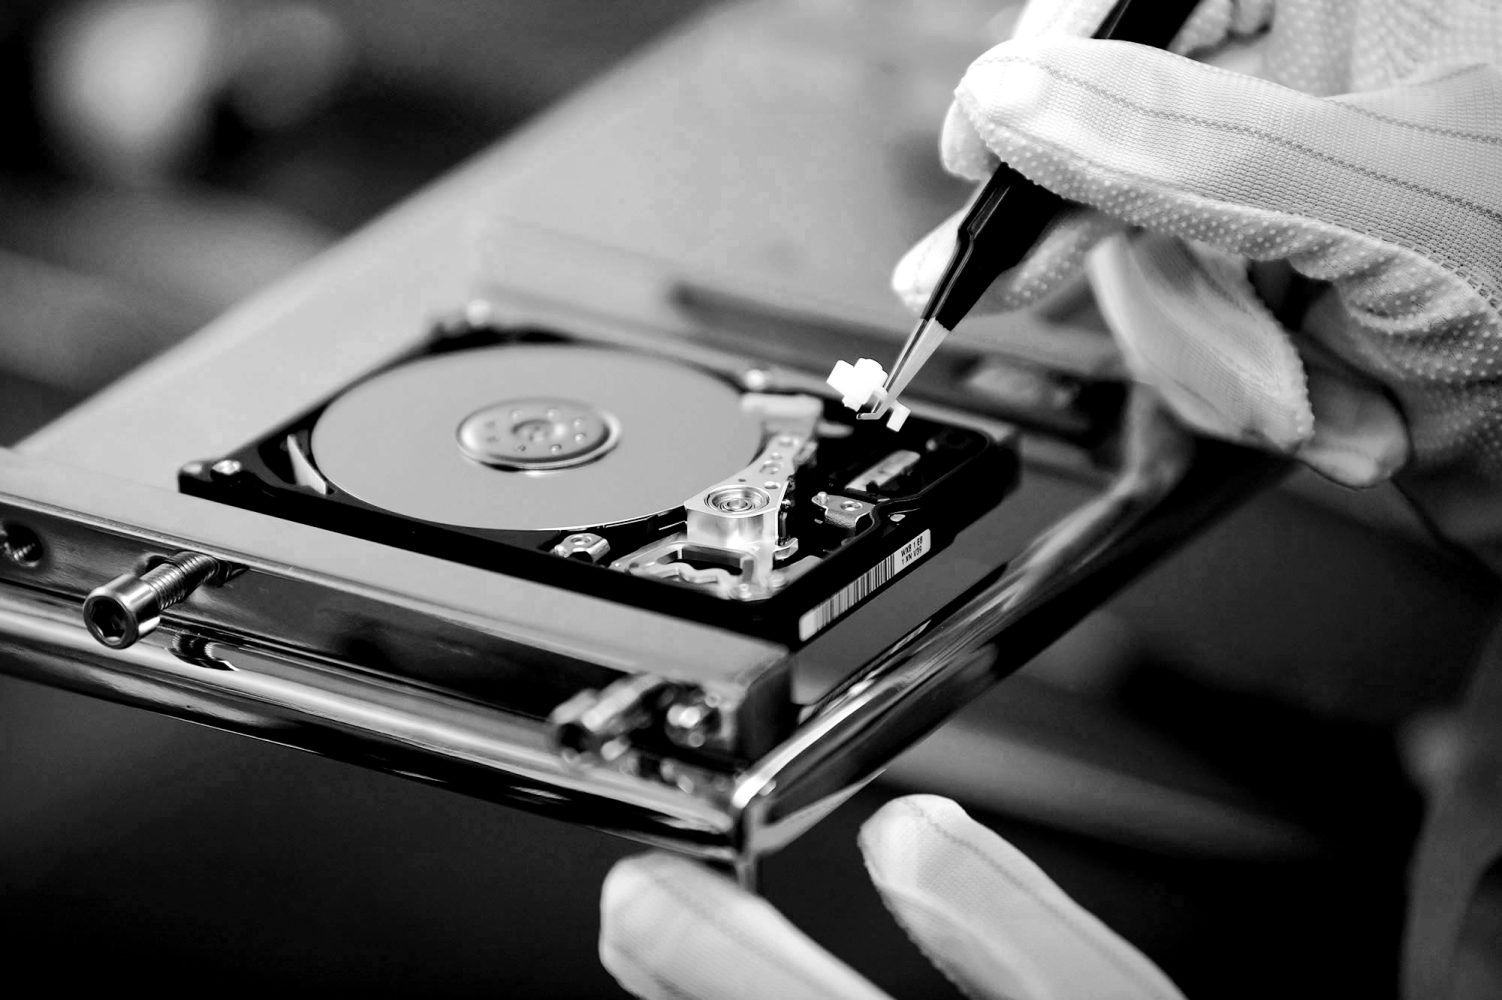 Data Recovery Services From External Hard Drive